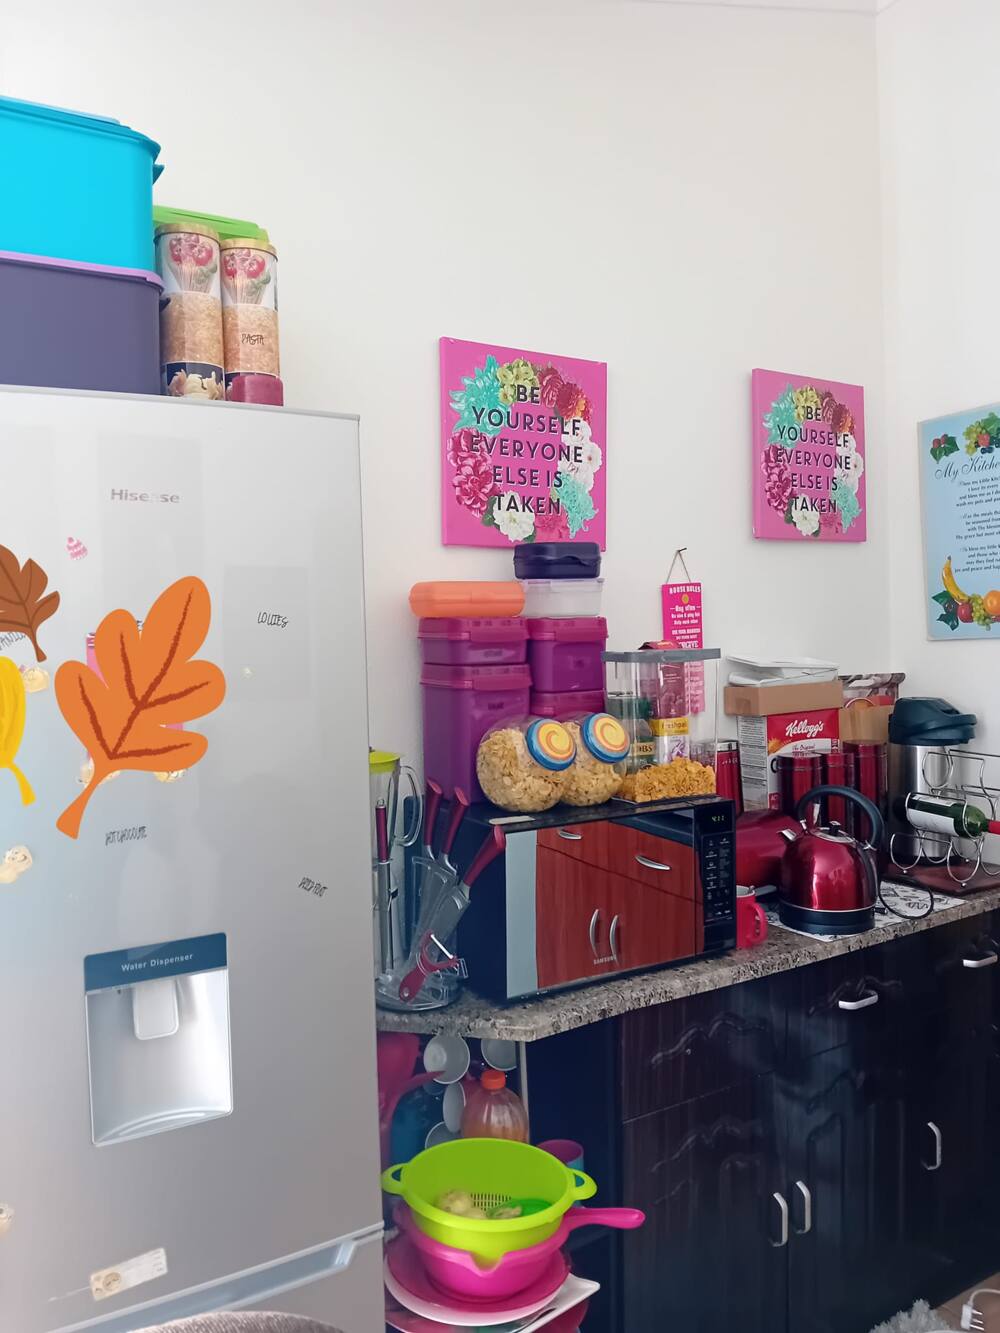 Mzansi lady's stunning decorating skills trends on social media shows off her kitchen.